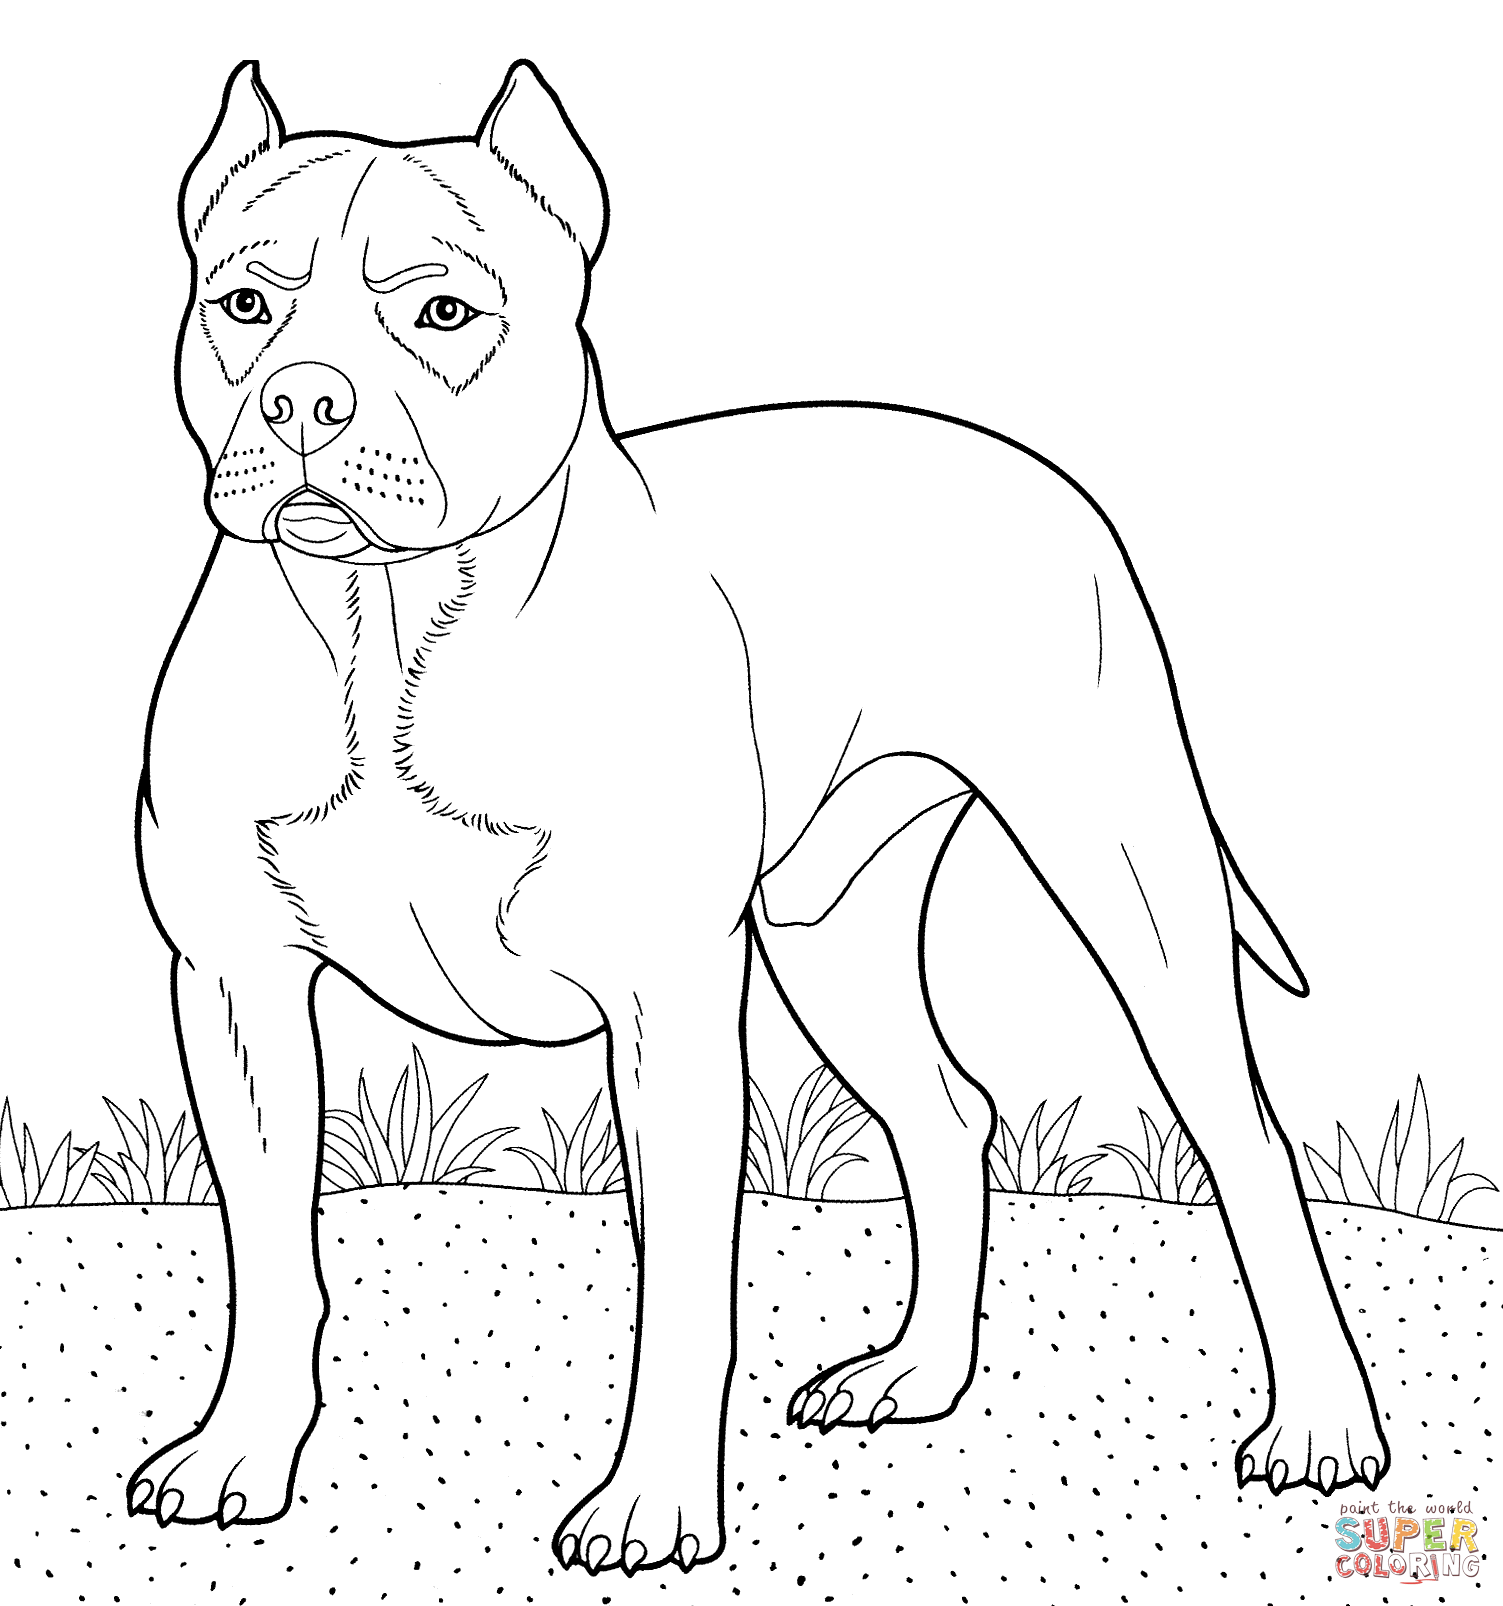 Pitbull Coloring Page | Free Printable Coloring Pages - Coloring Home